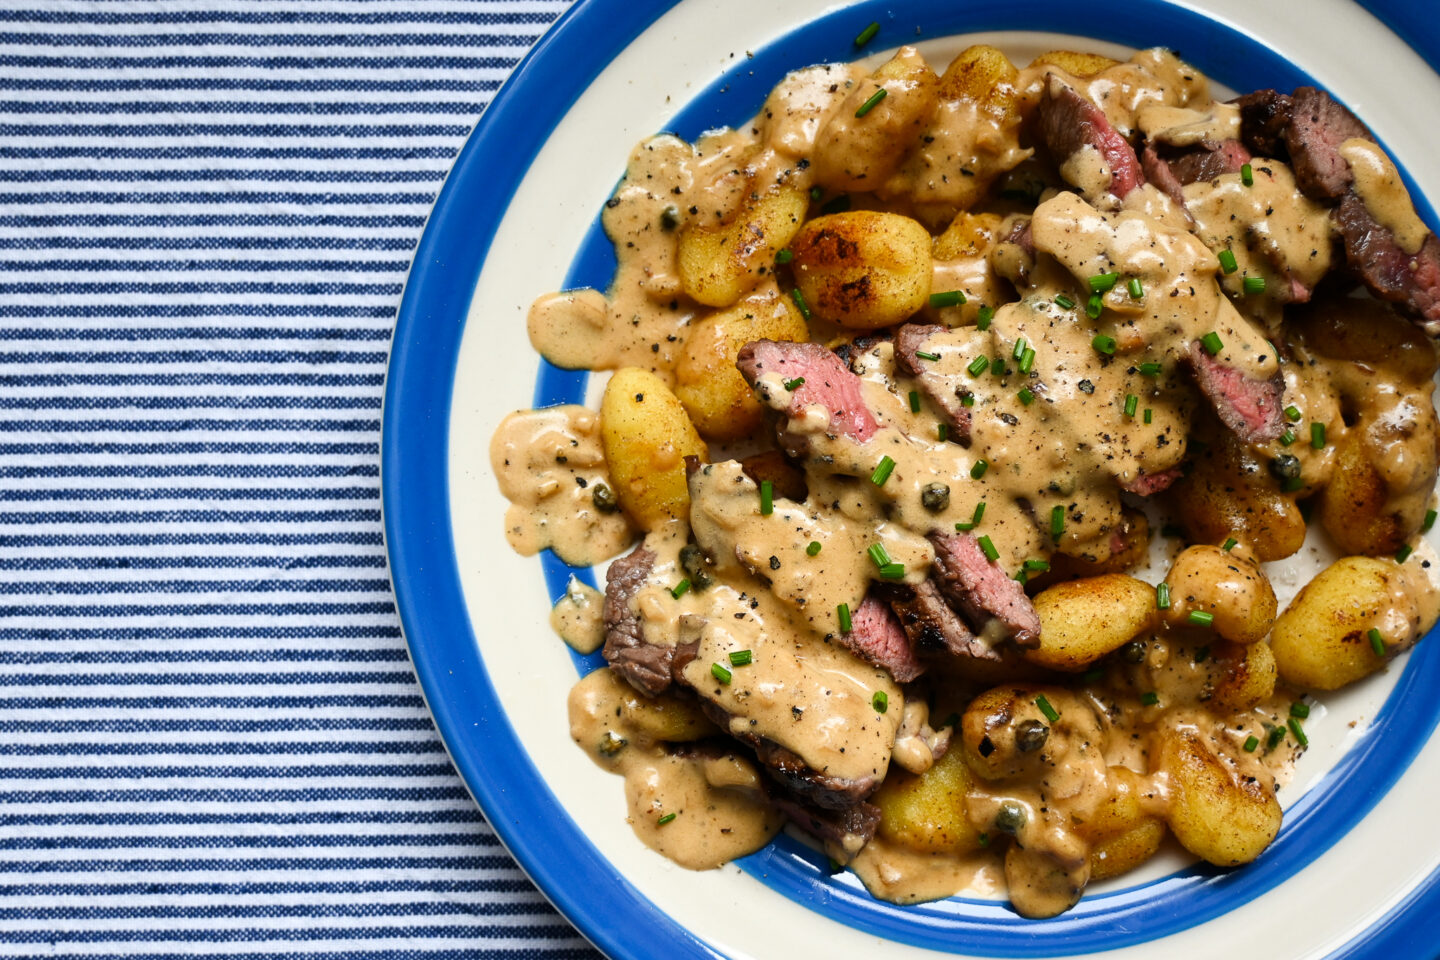 Fried Gnocchi with sliced medium-rare rump steak across the top drizzled with peppercorn sauce & sprinkled with chopped chives on a blue & white striped plate against a blue & white striped background.